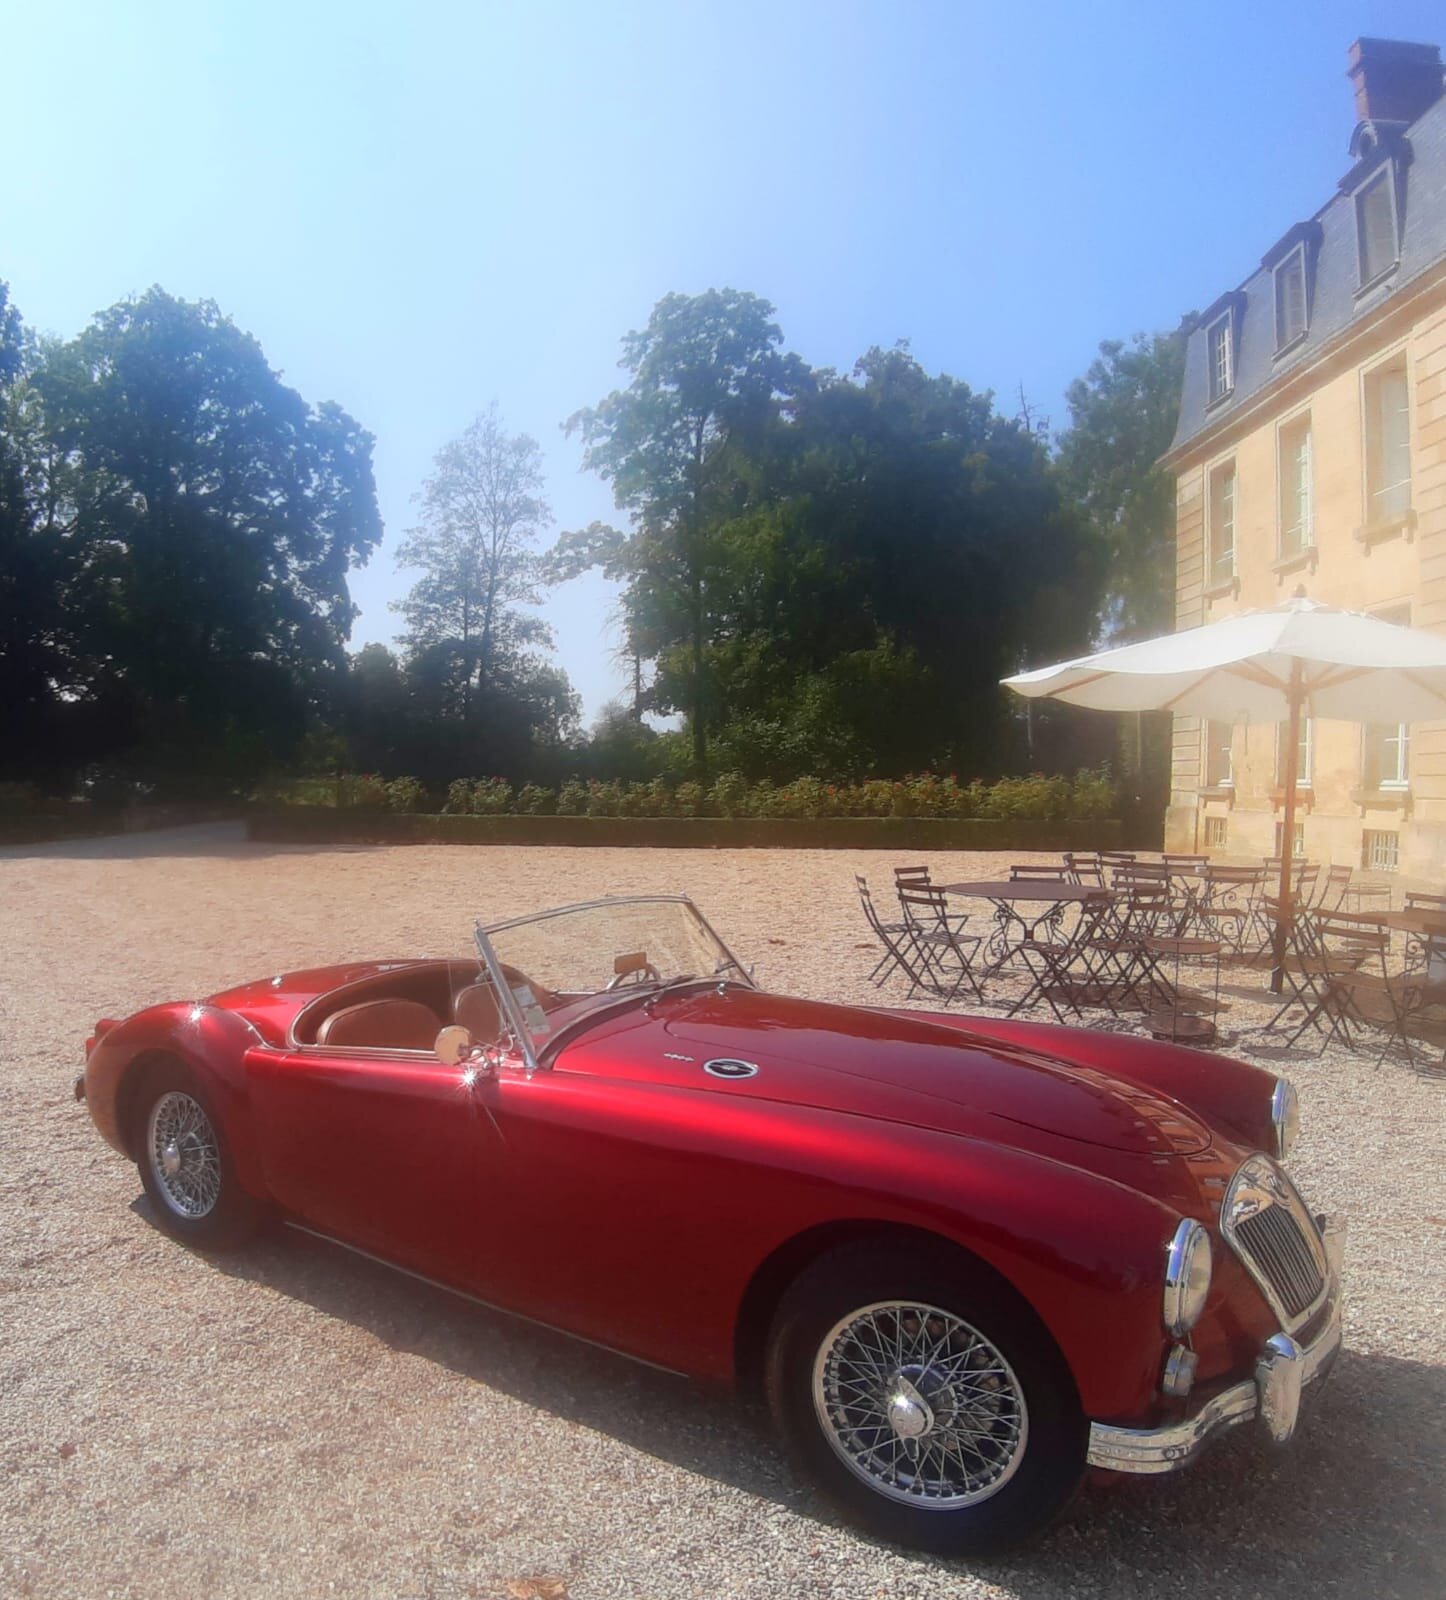 A red car parked in front of the chateau which is sometimes used for corporate and other kinds of retreats.